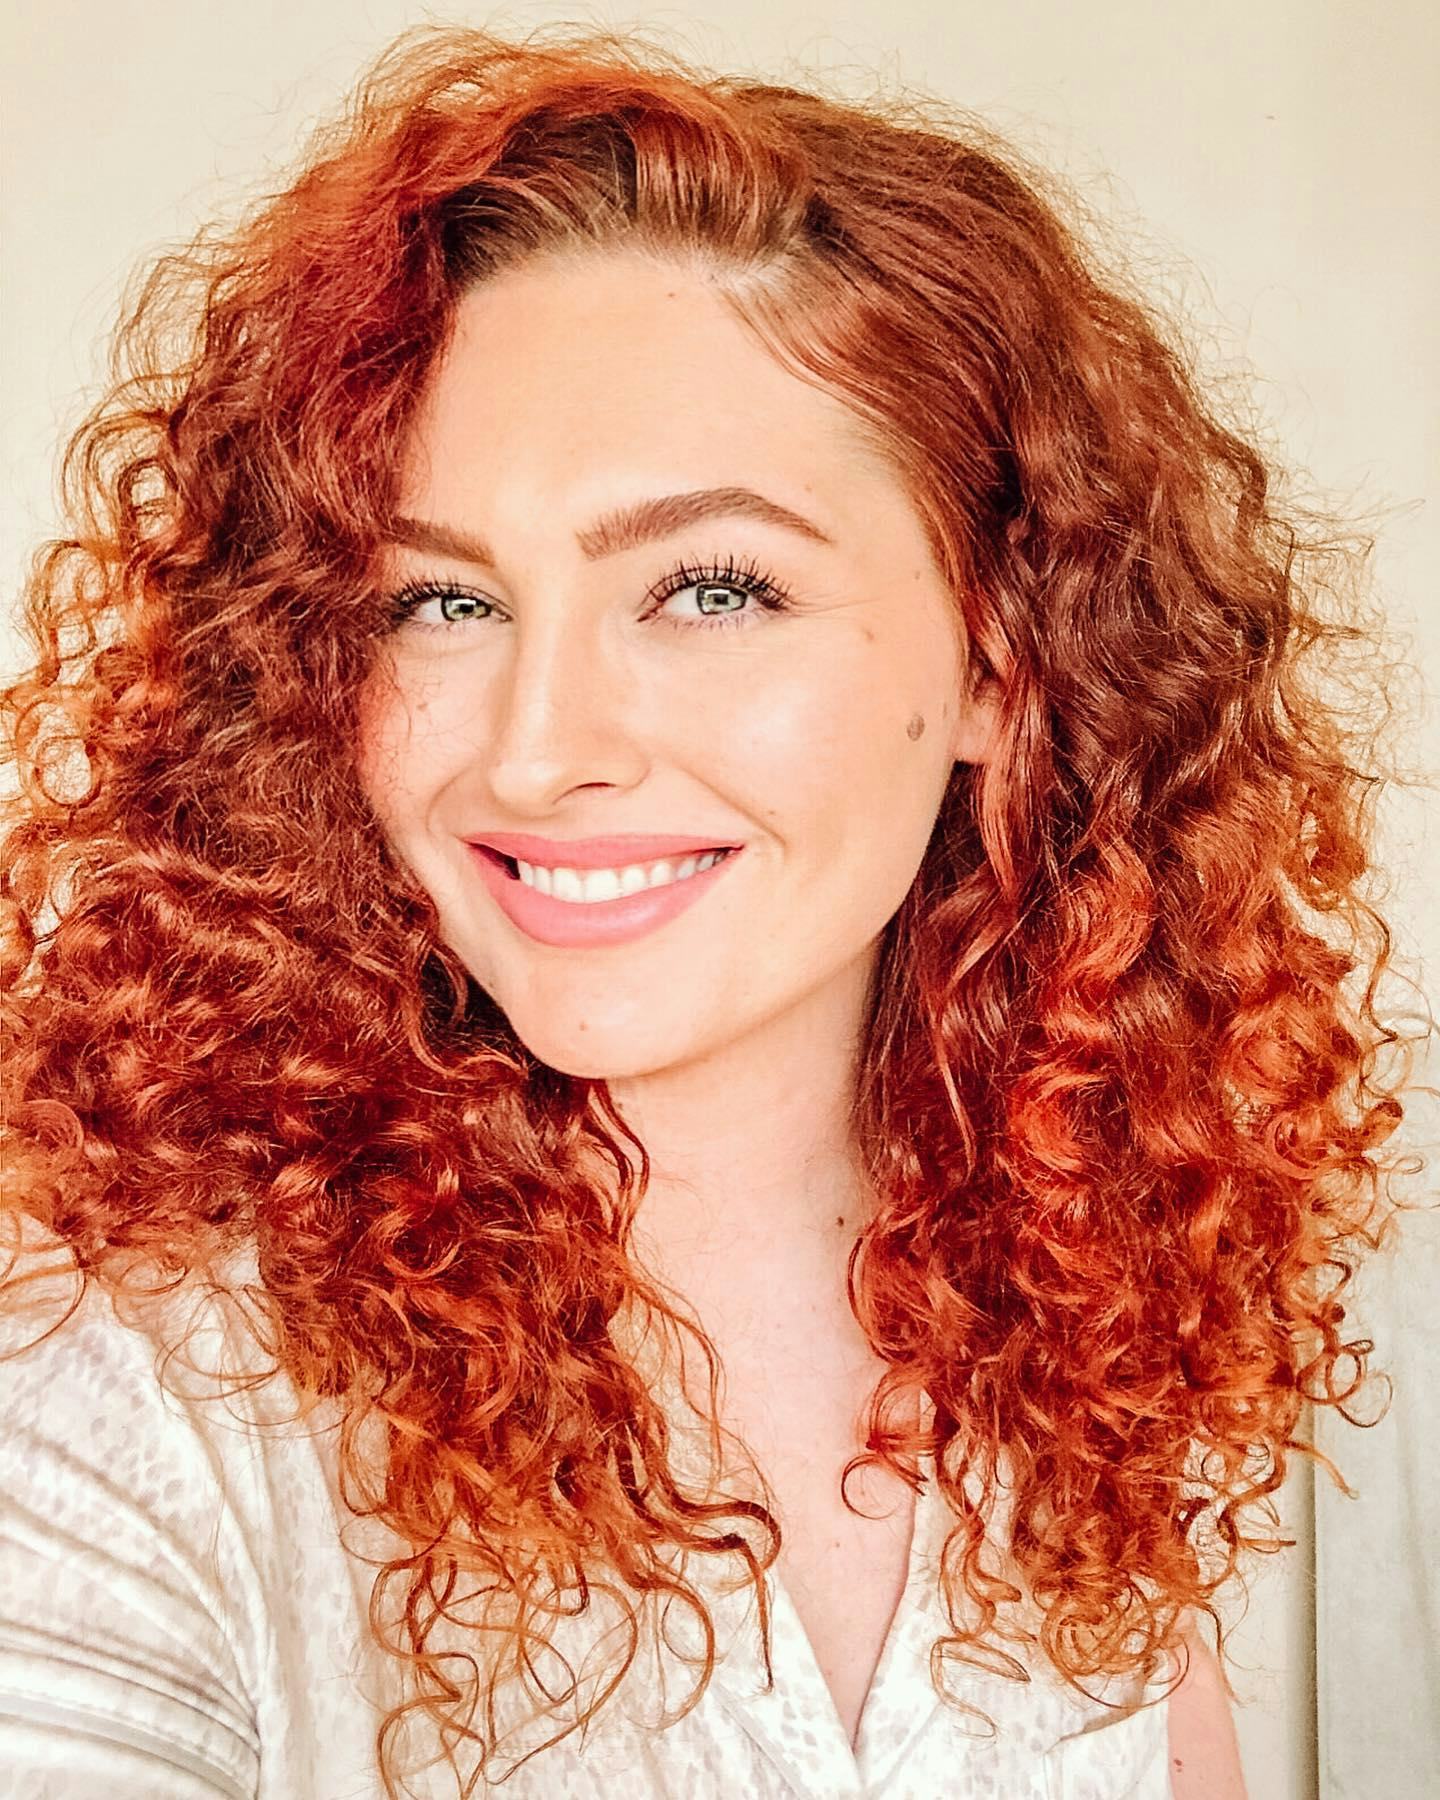 Best Hair Dye for Curly Hair - Safe for Your Curls